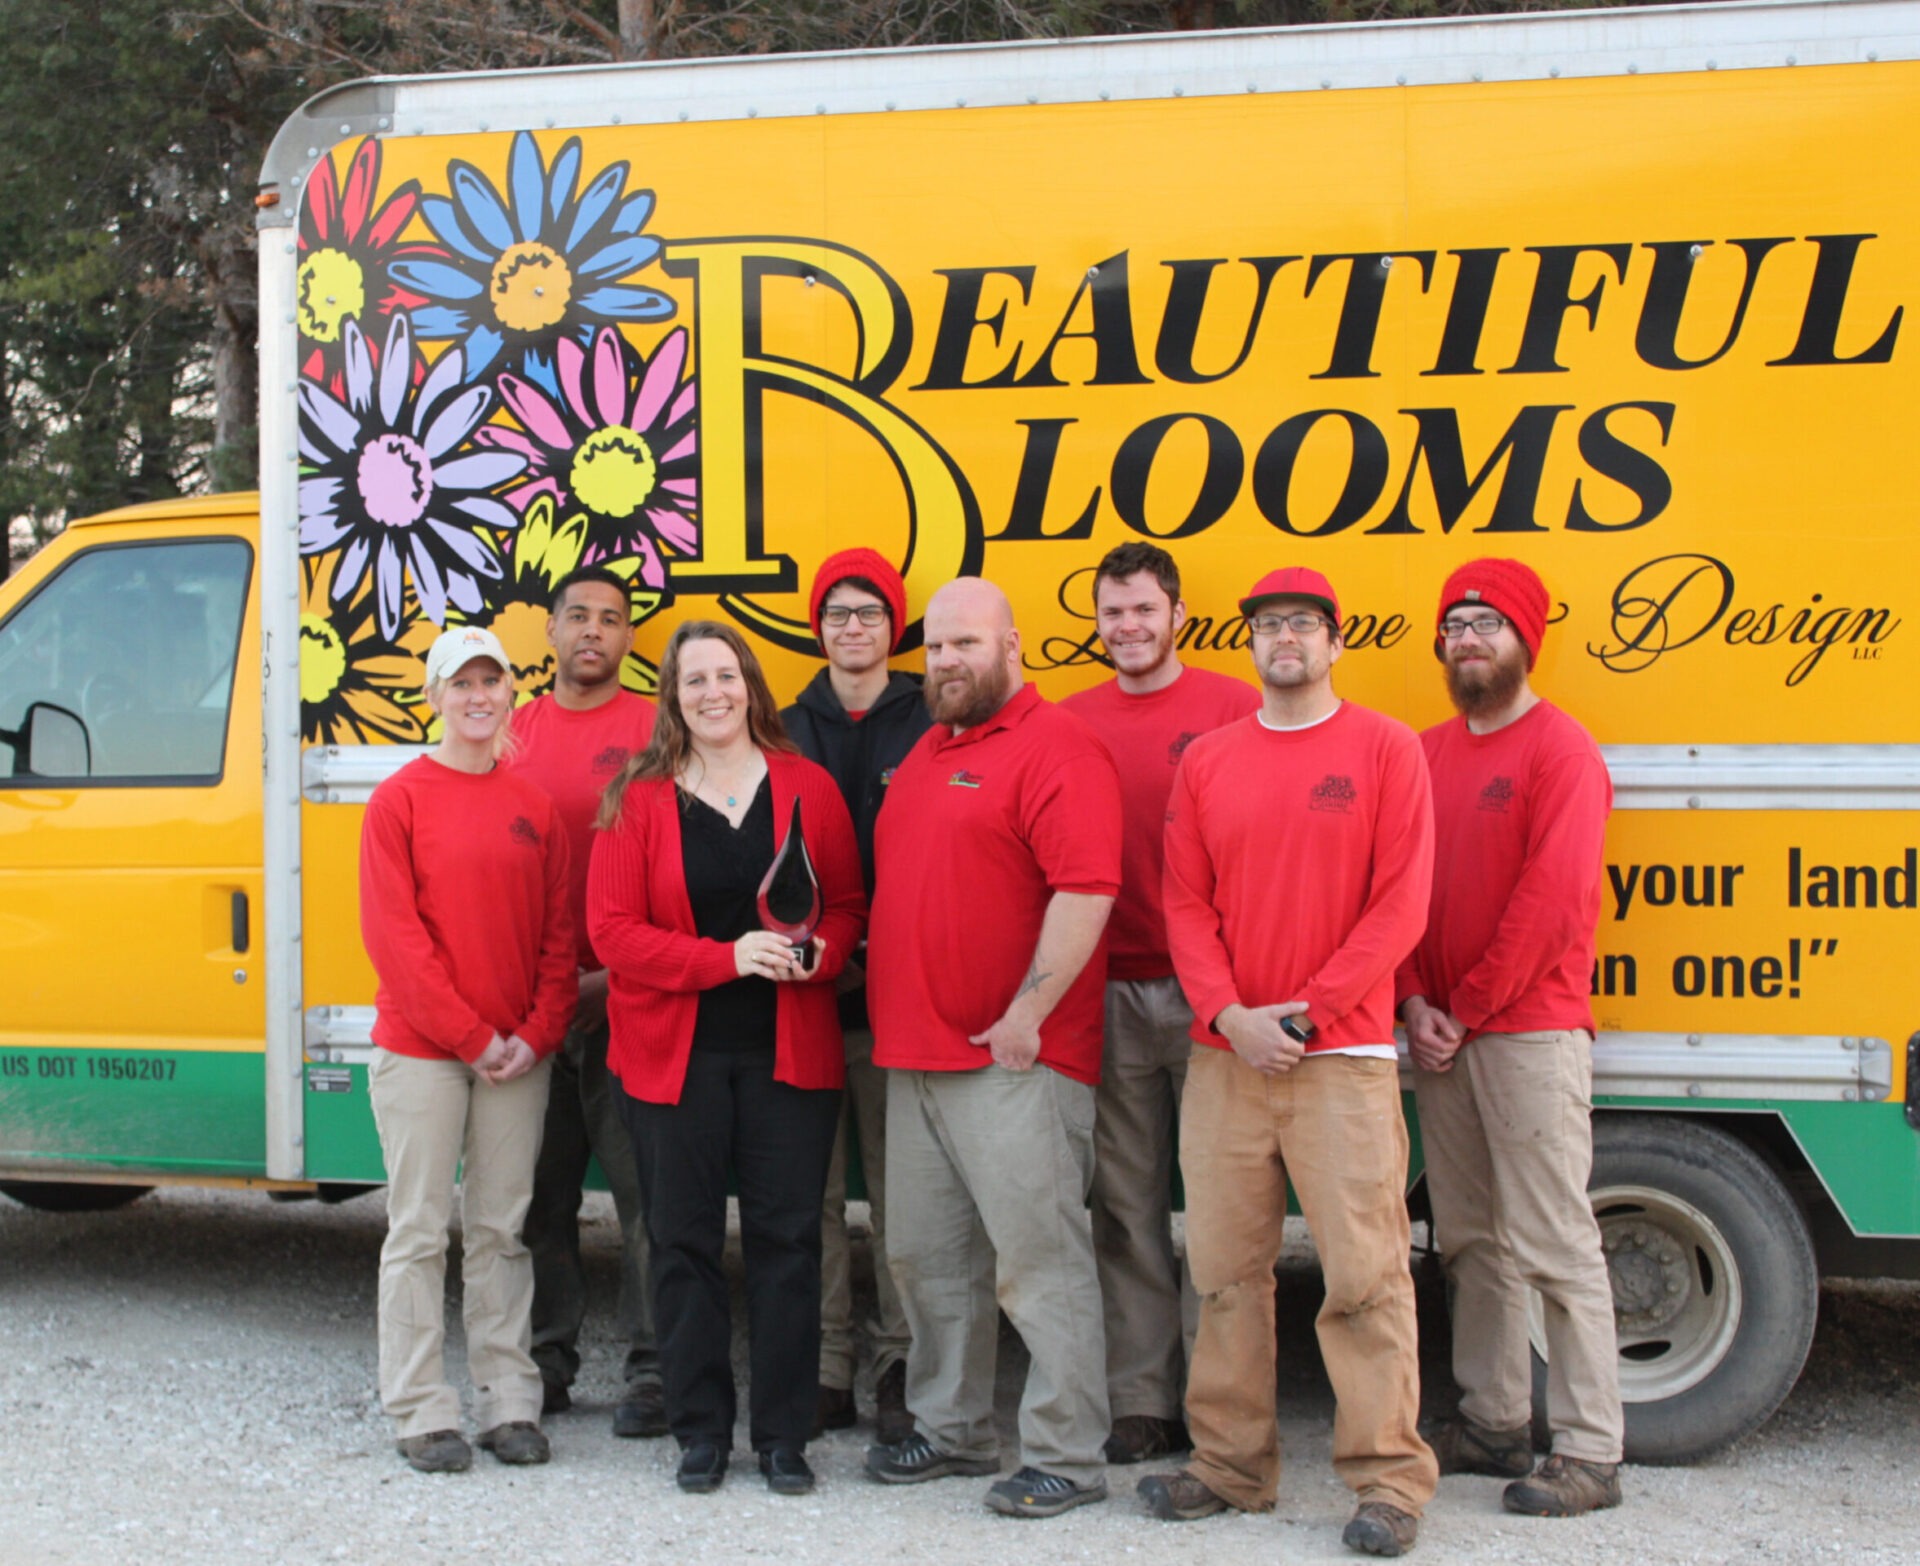 A group of eight people wearing red shirts stands in front of a yellow truck decorated with flowers and the words "Beautiful Blooms Landscape & Design."